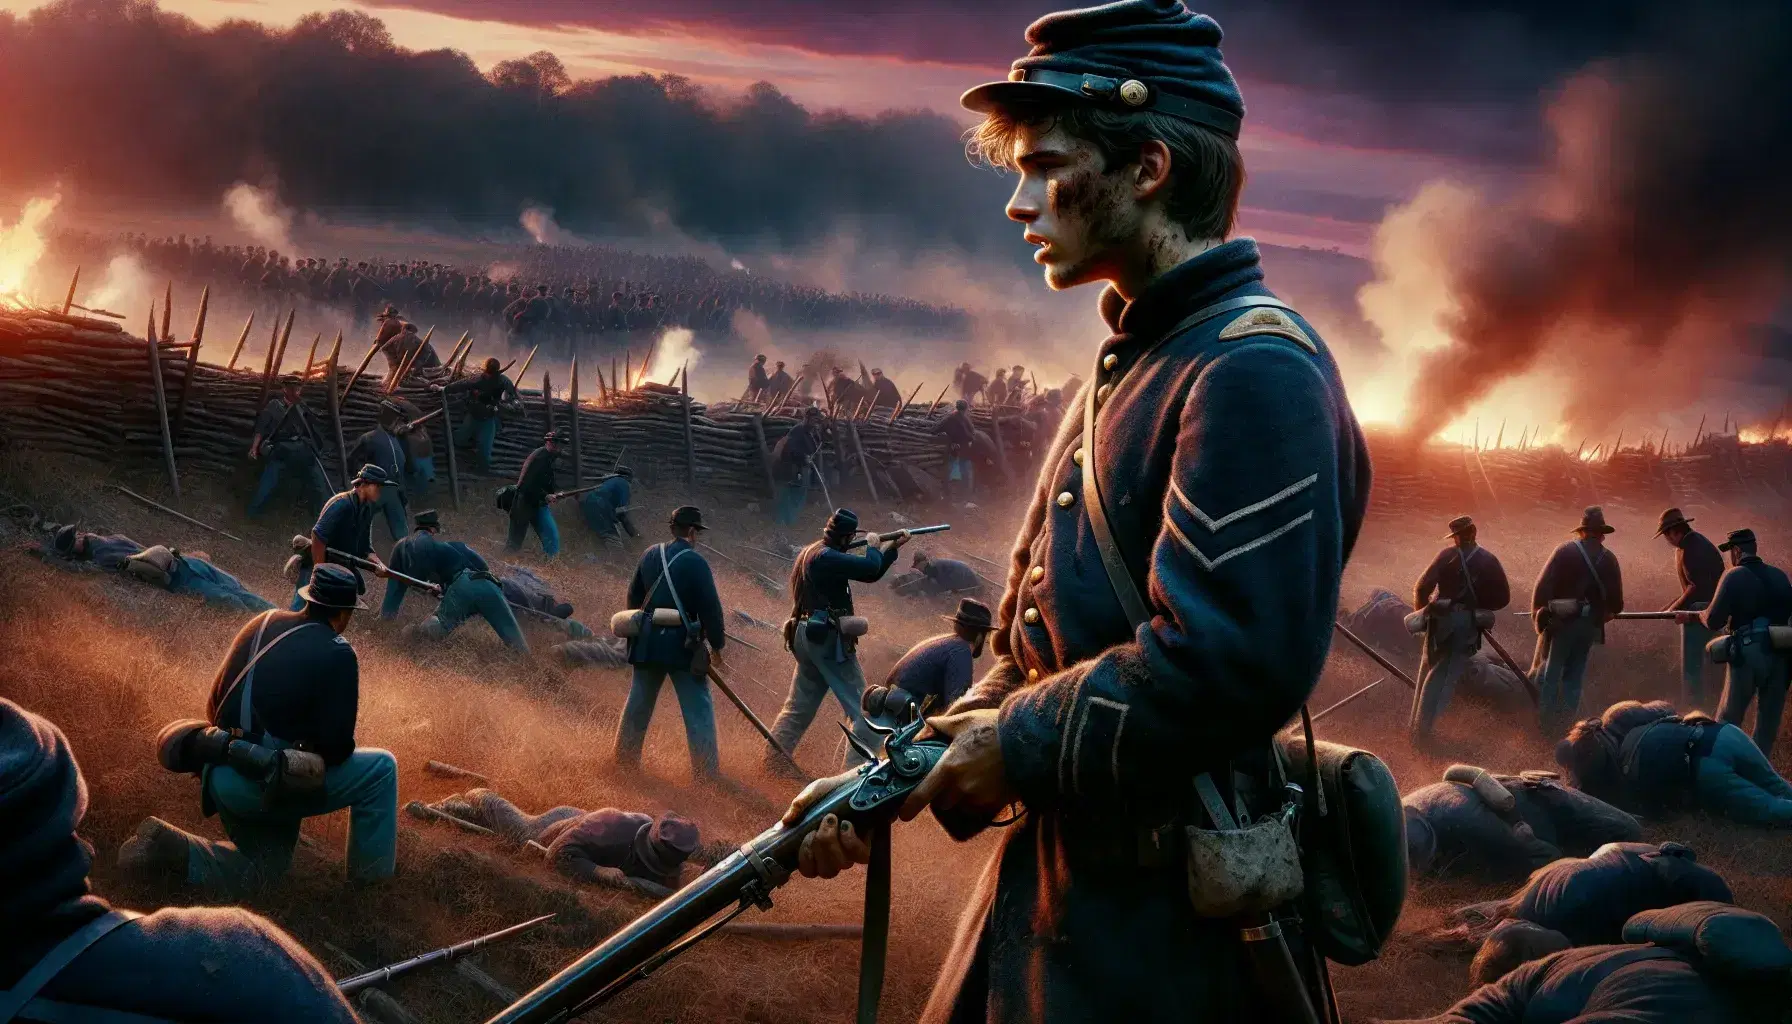 Twilight Civil War scene with a weary Union soldier gripping a bayonet rifle, amidst a backdrop of combat, smoke, and a vivid sunset.